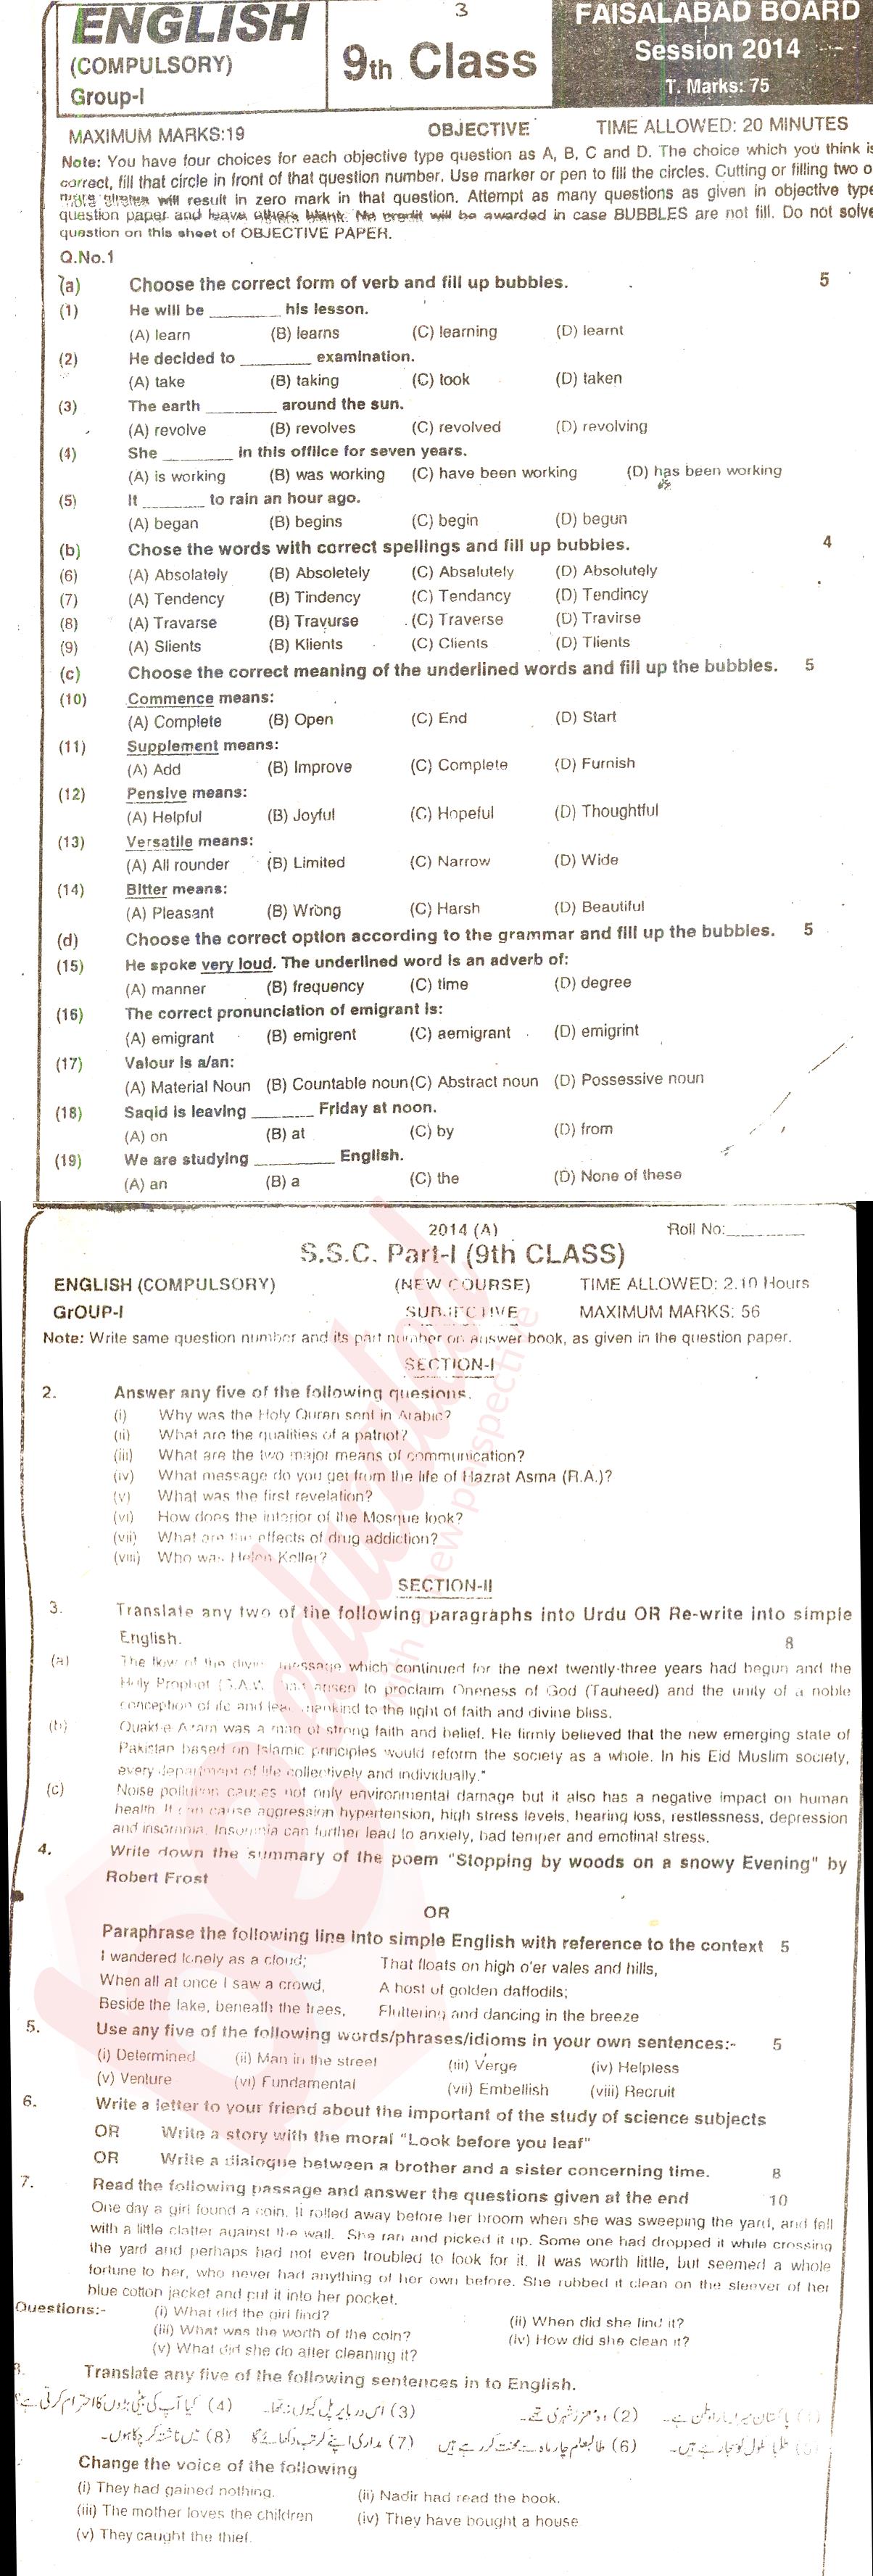 English 9th class Past Paper Group 1 BISE Faisalabad 2014